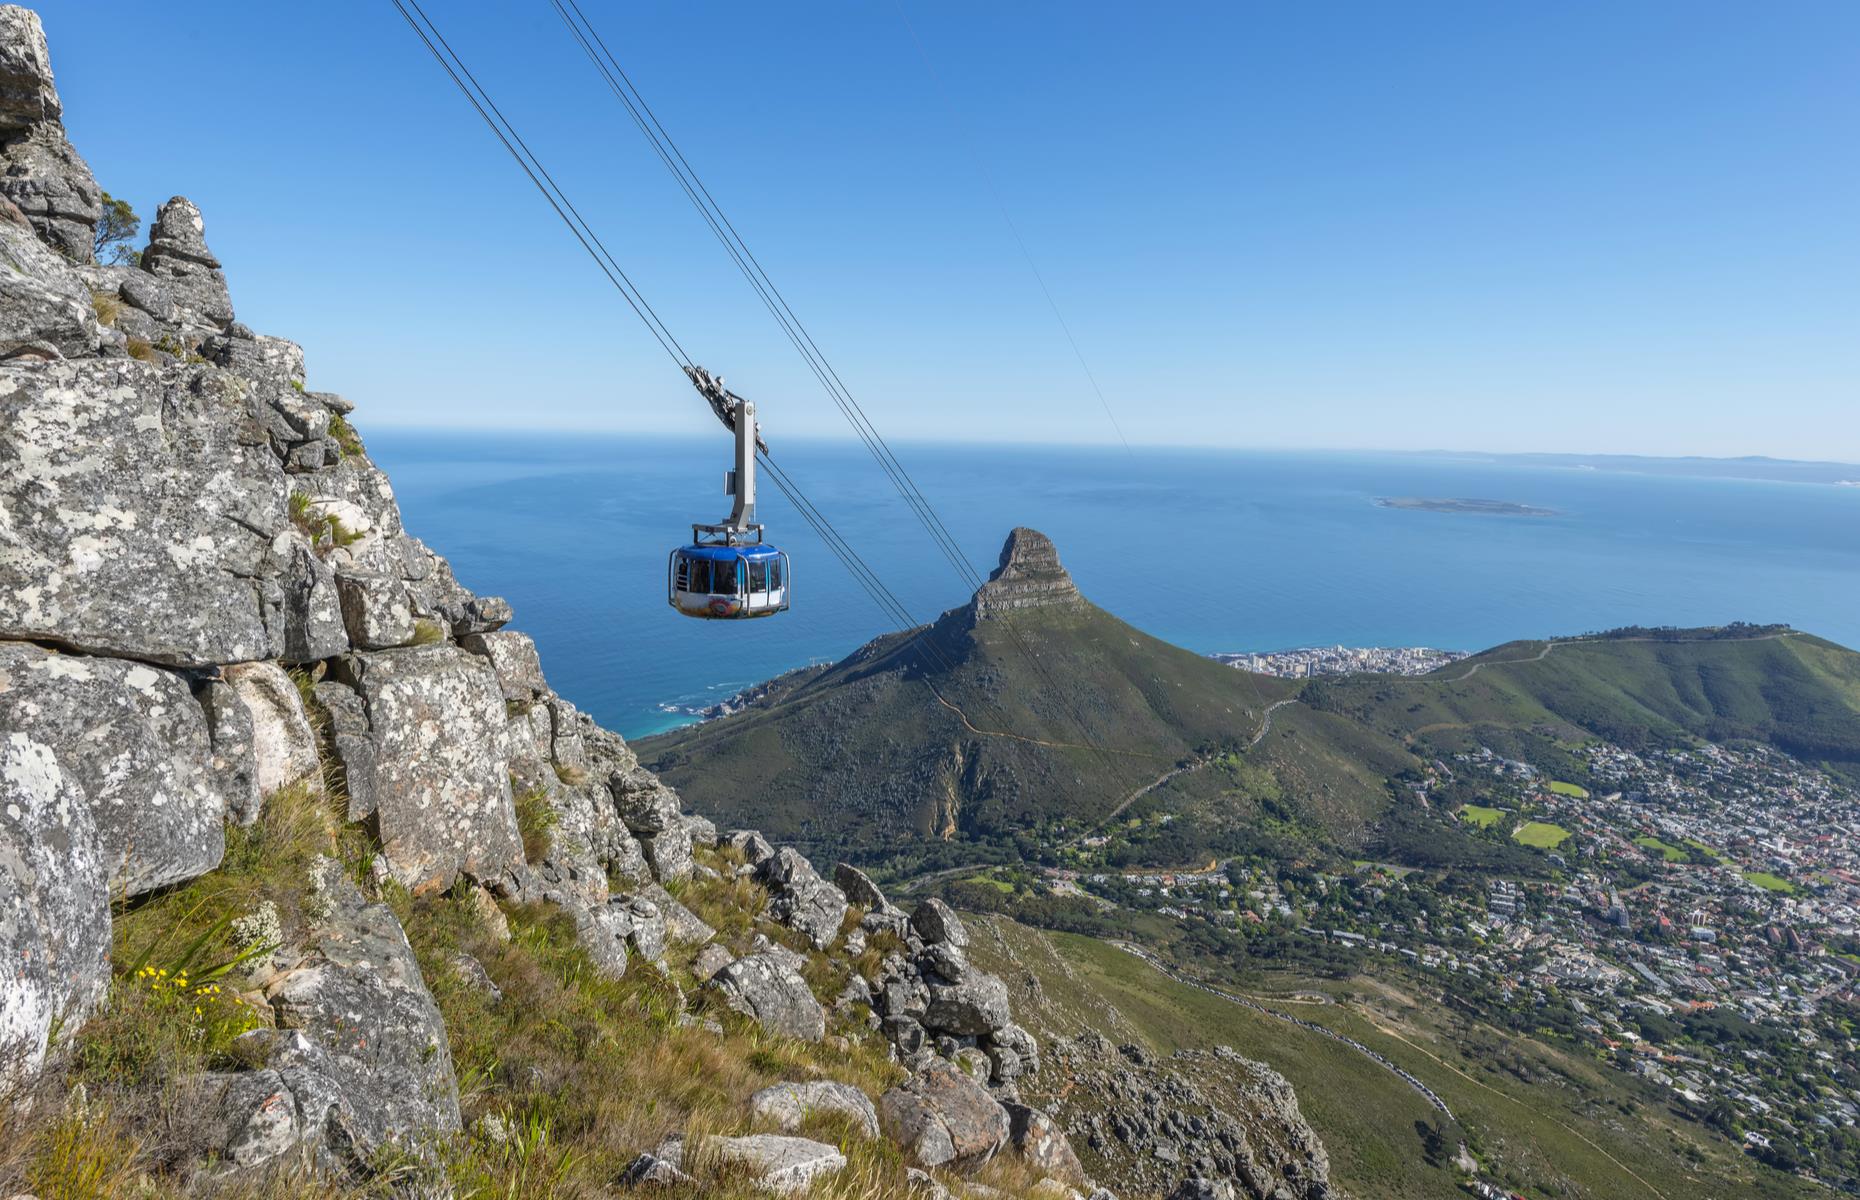 <p>You could lace up your boots, join a guided day hike and consider abseiling part of the return journey, but the Table Mountain Aerial Cableway is a justifiably popular choice for many. Book in advance and opt for a quieter afternoon slot if the weather is behaving.</p>